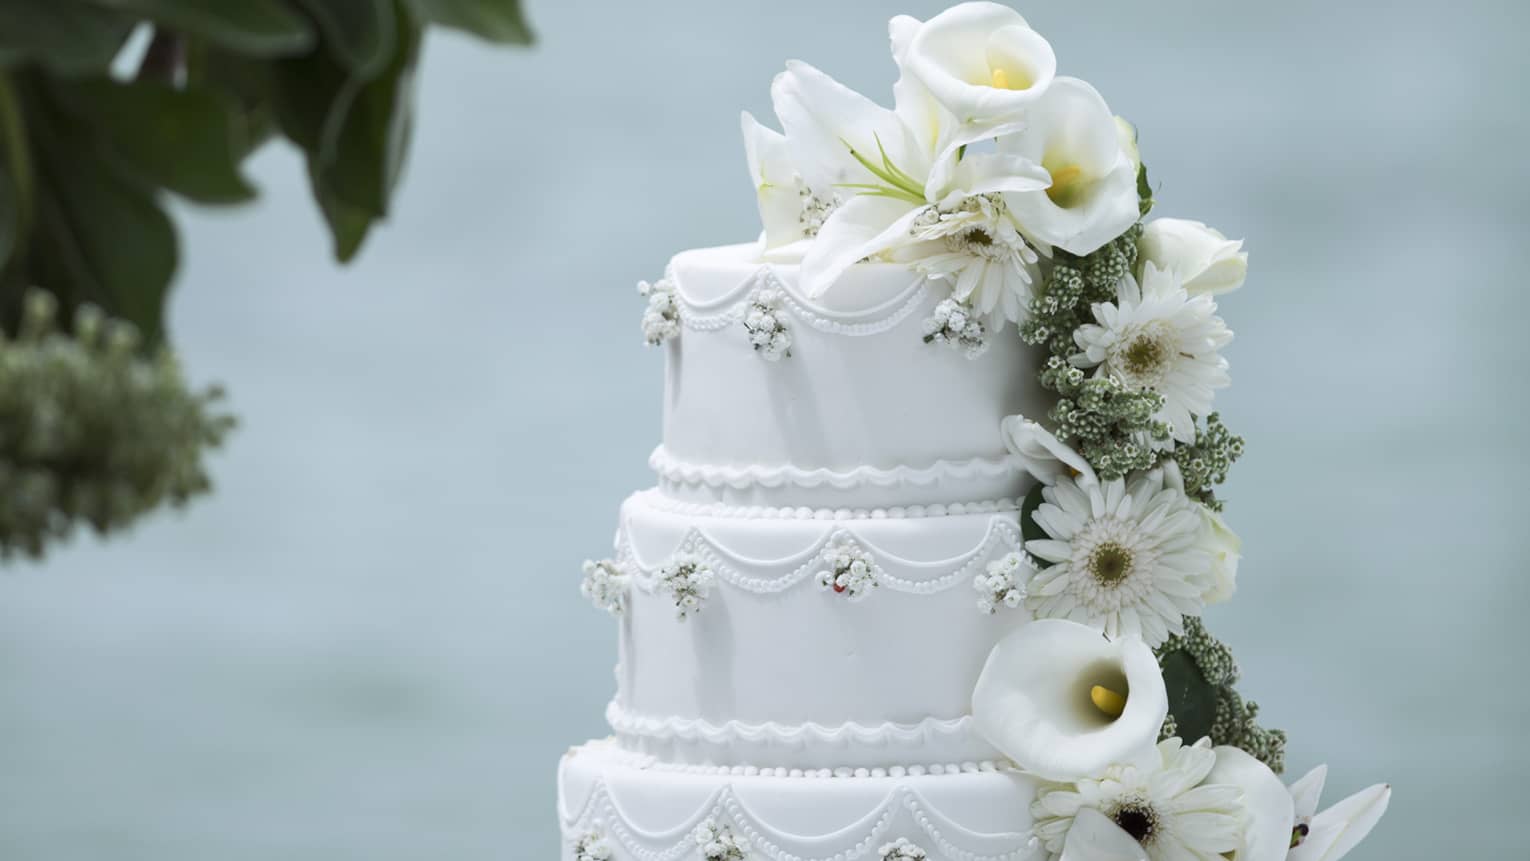 Three tiered wedding cake decorated with white flowers, daisies